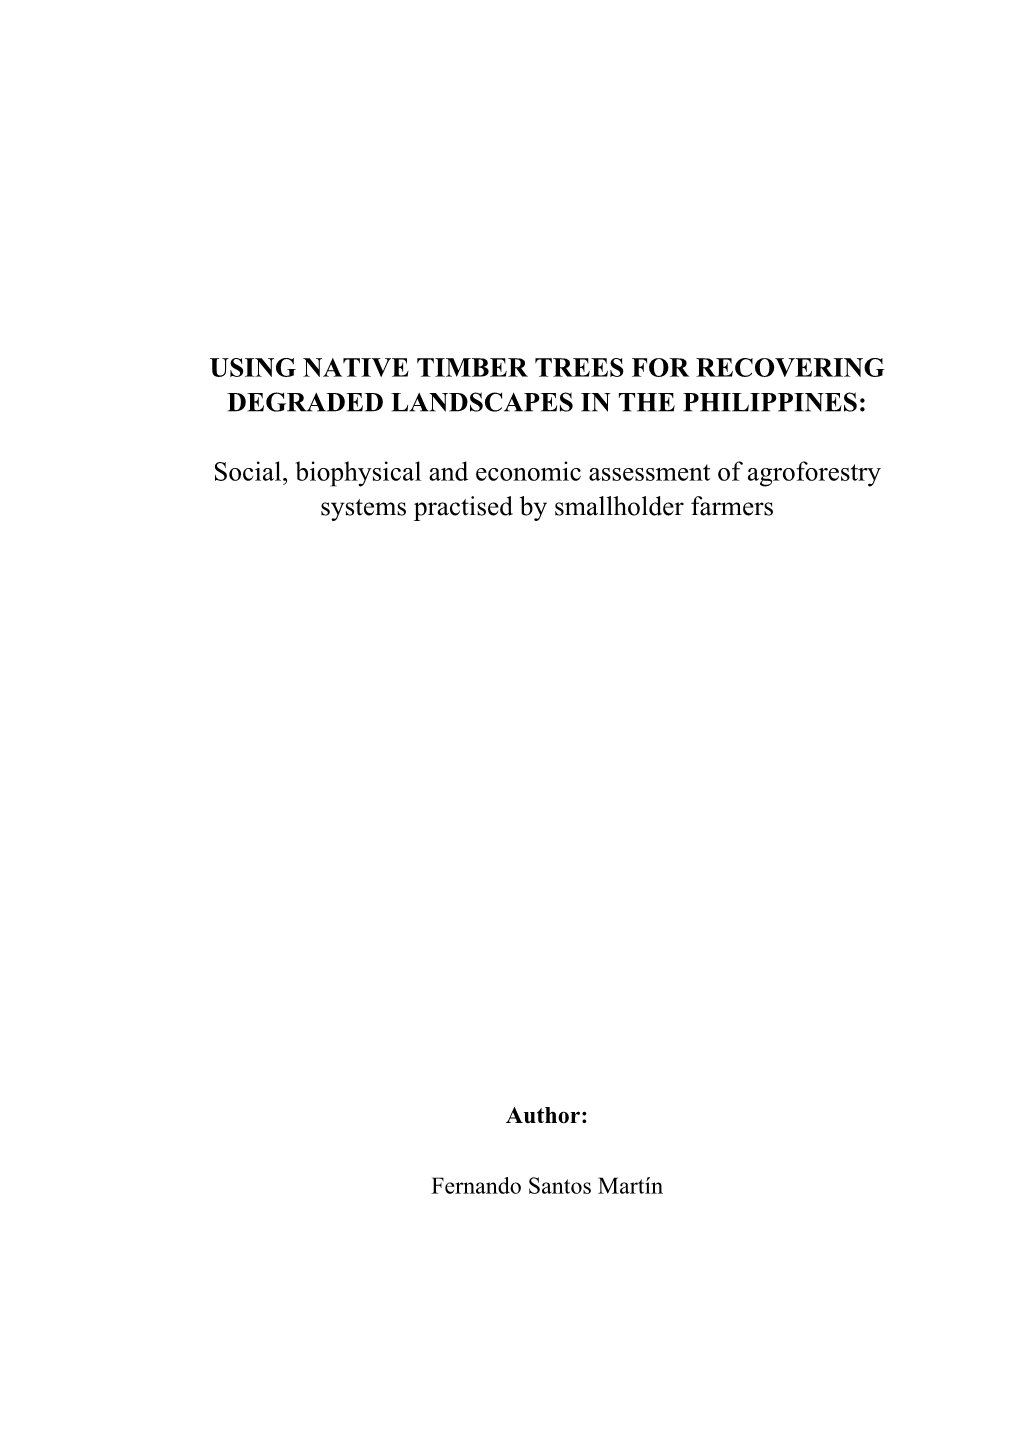 Using Native Timber Trees for Recovering Degraded Landscapes in the Philippines